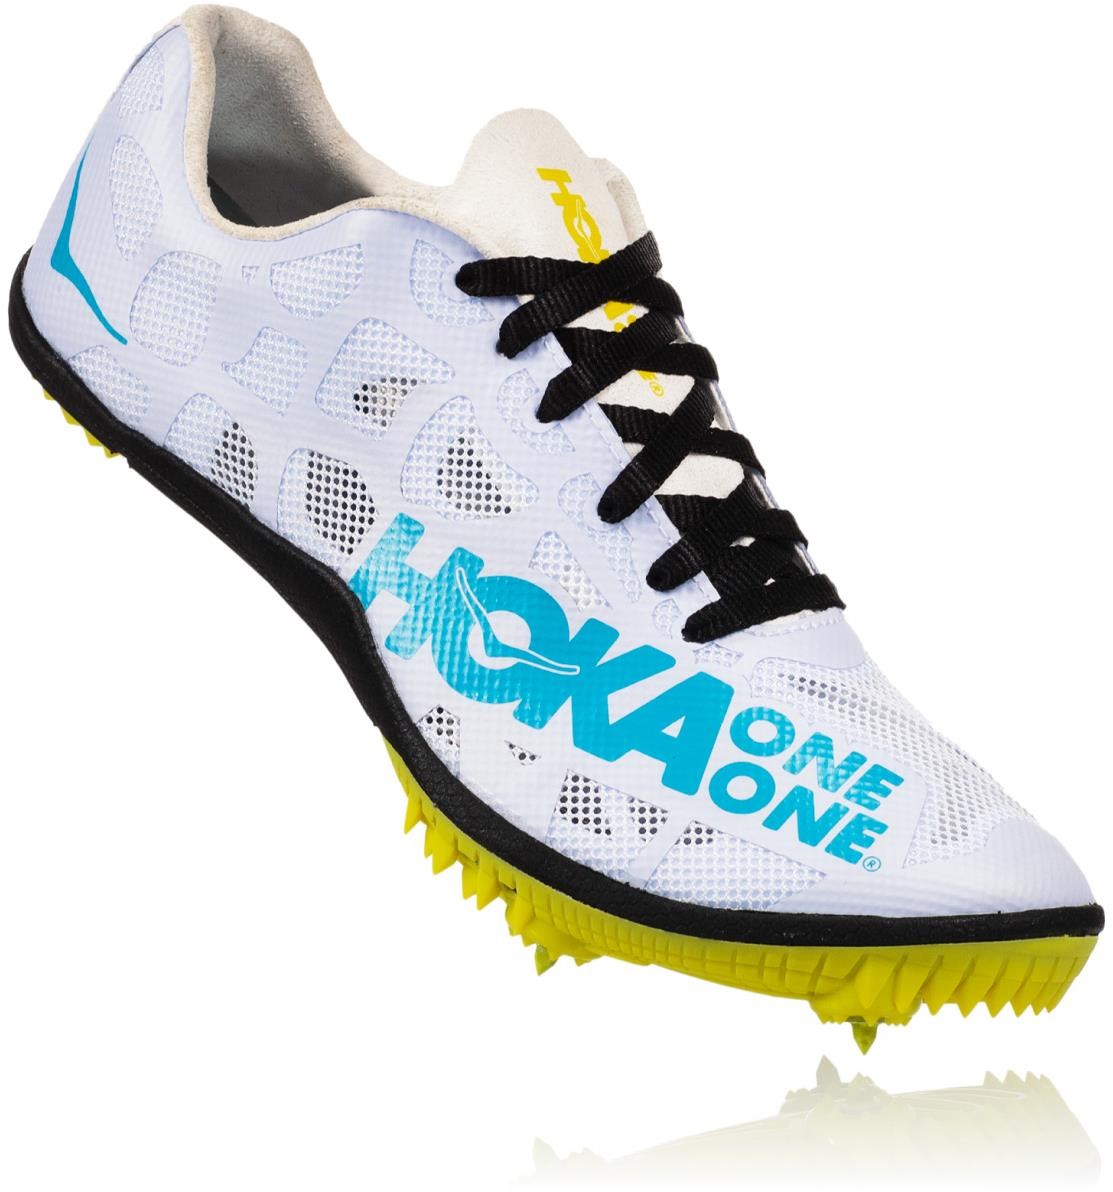 Hoka Rocket Middle Distance Womens Running Shoes product image